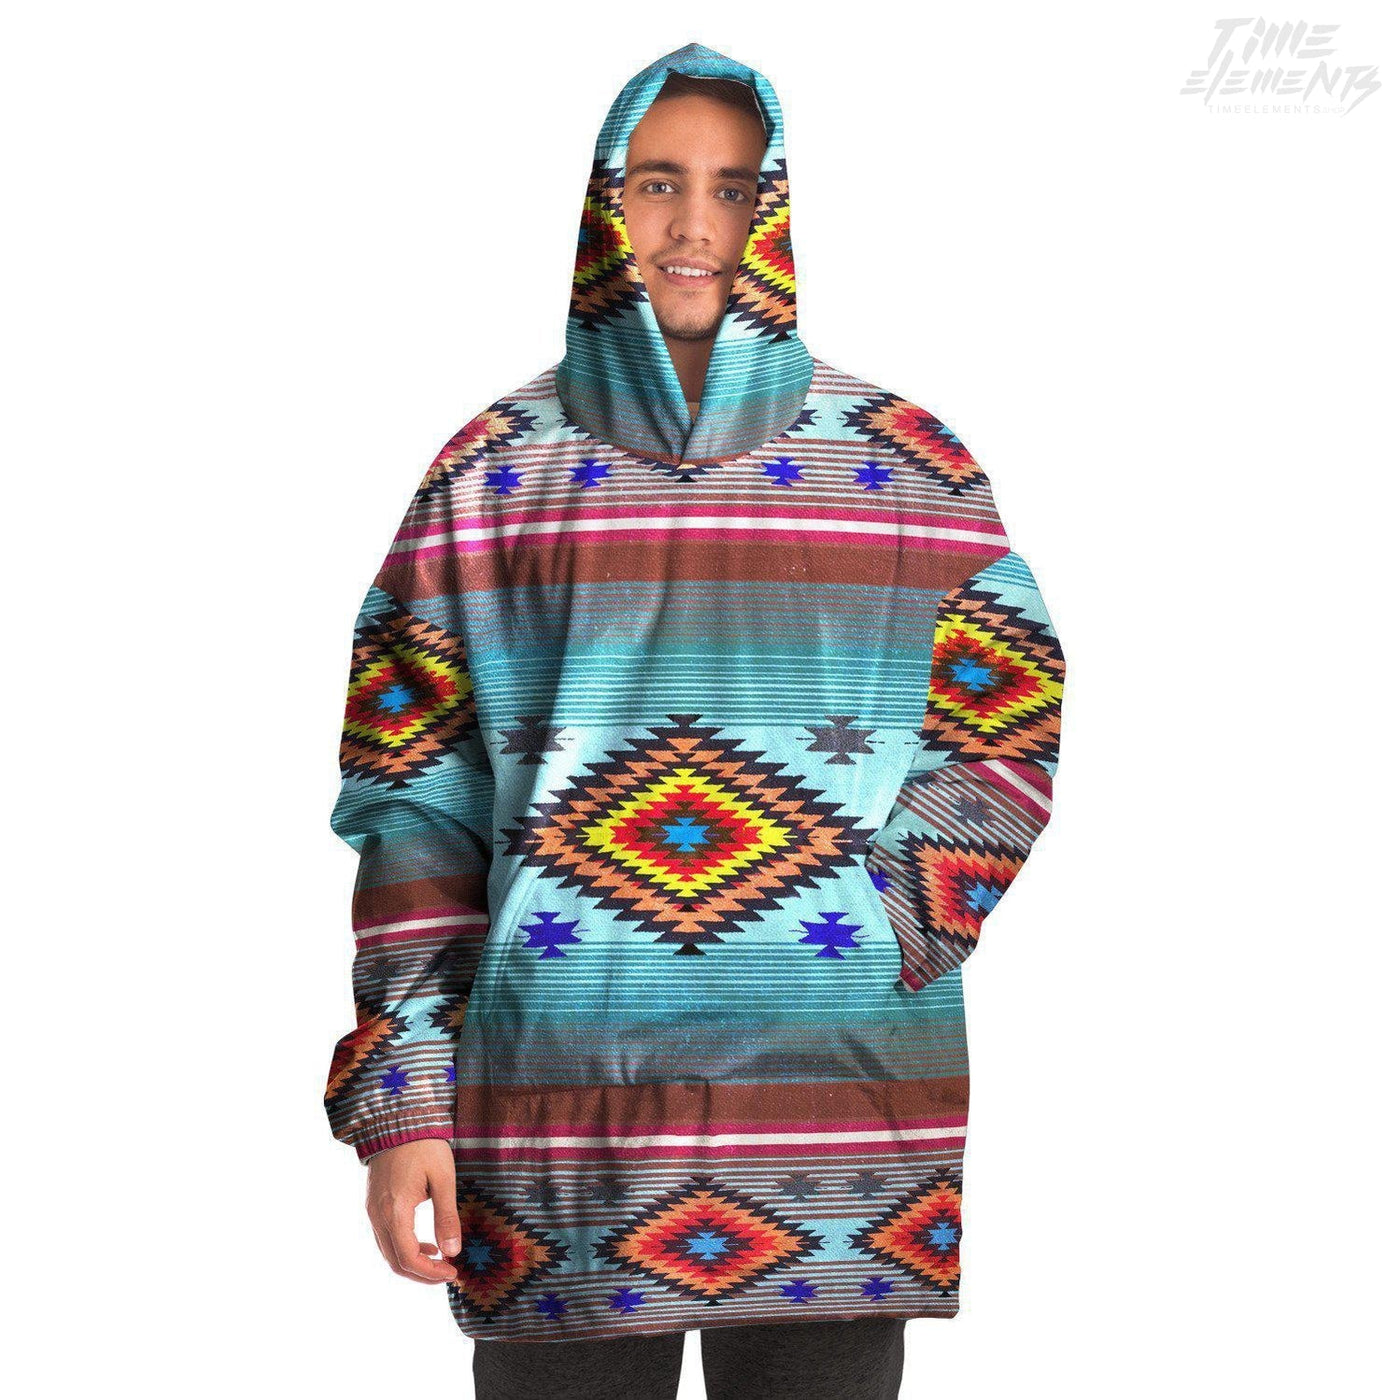 Native American Snug Hoodie Coat with Bright Blue Red Shamanic Tribal Pattern